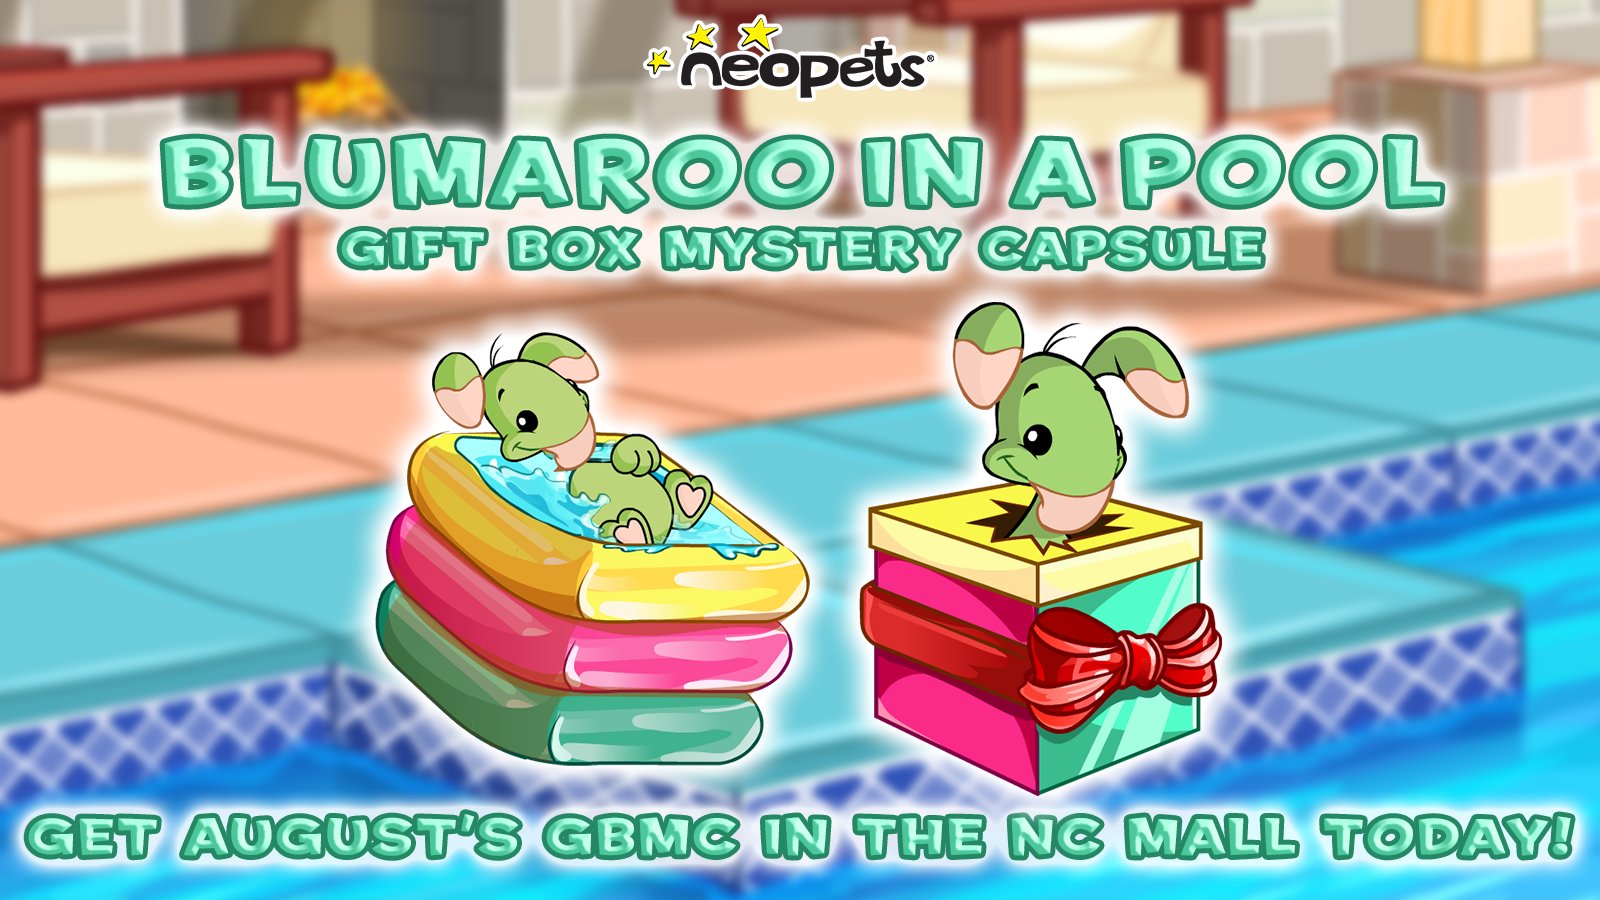 neopets on X: Going for a swim? Count us in! 🏊 Check out the new Blumaroo  in a Pool Gift Box Mystery Capsule, available now in the NC Mall! 🎁   /